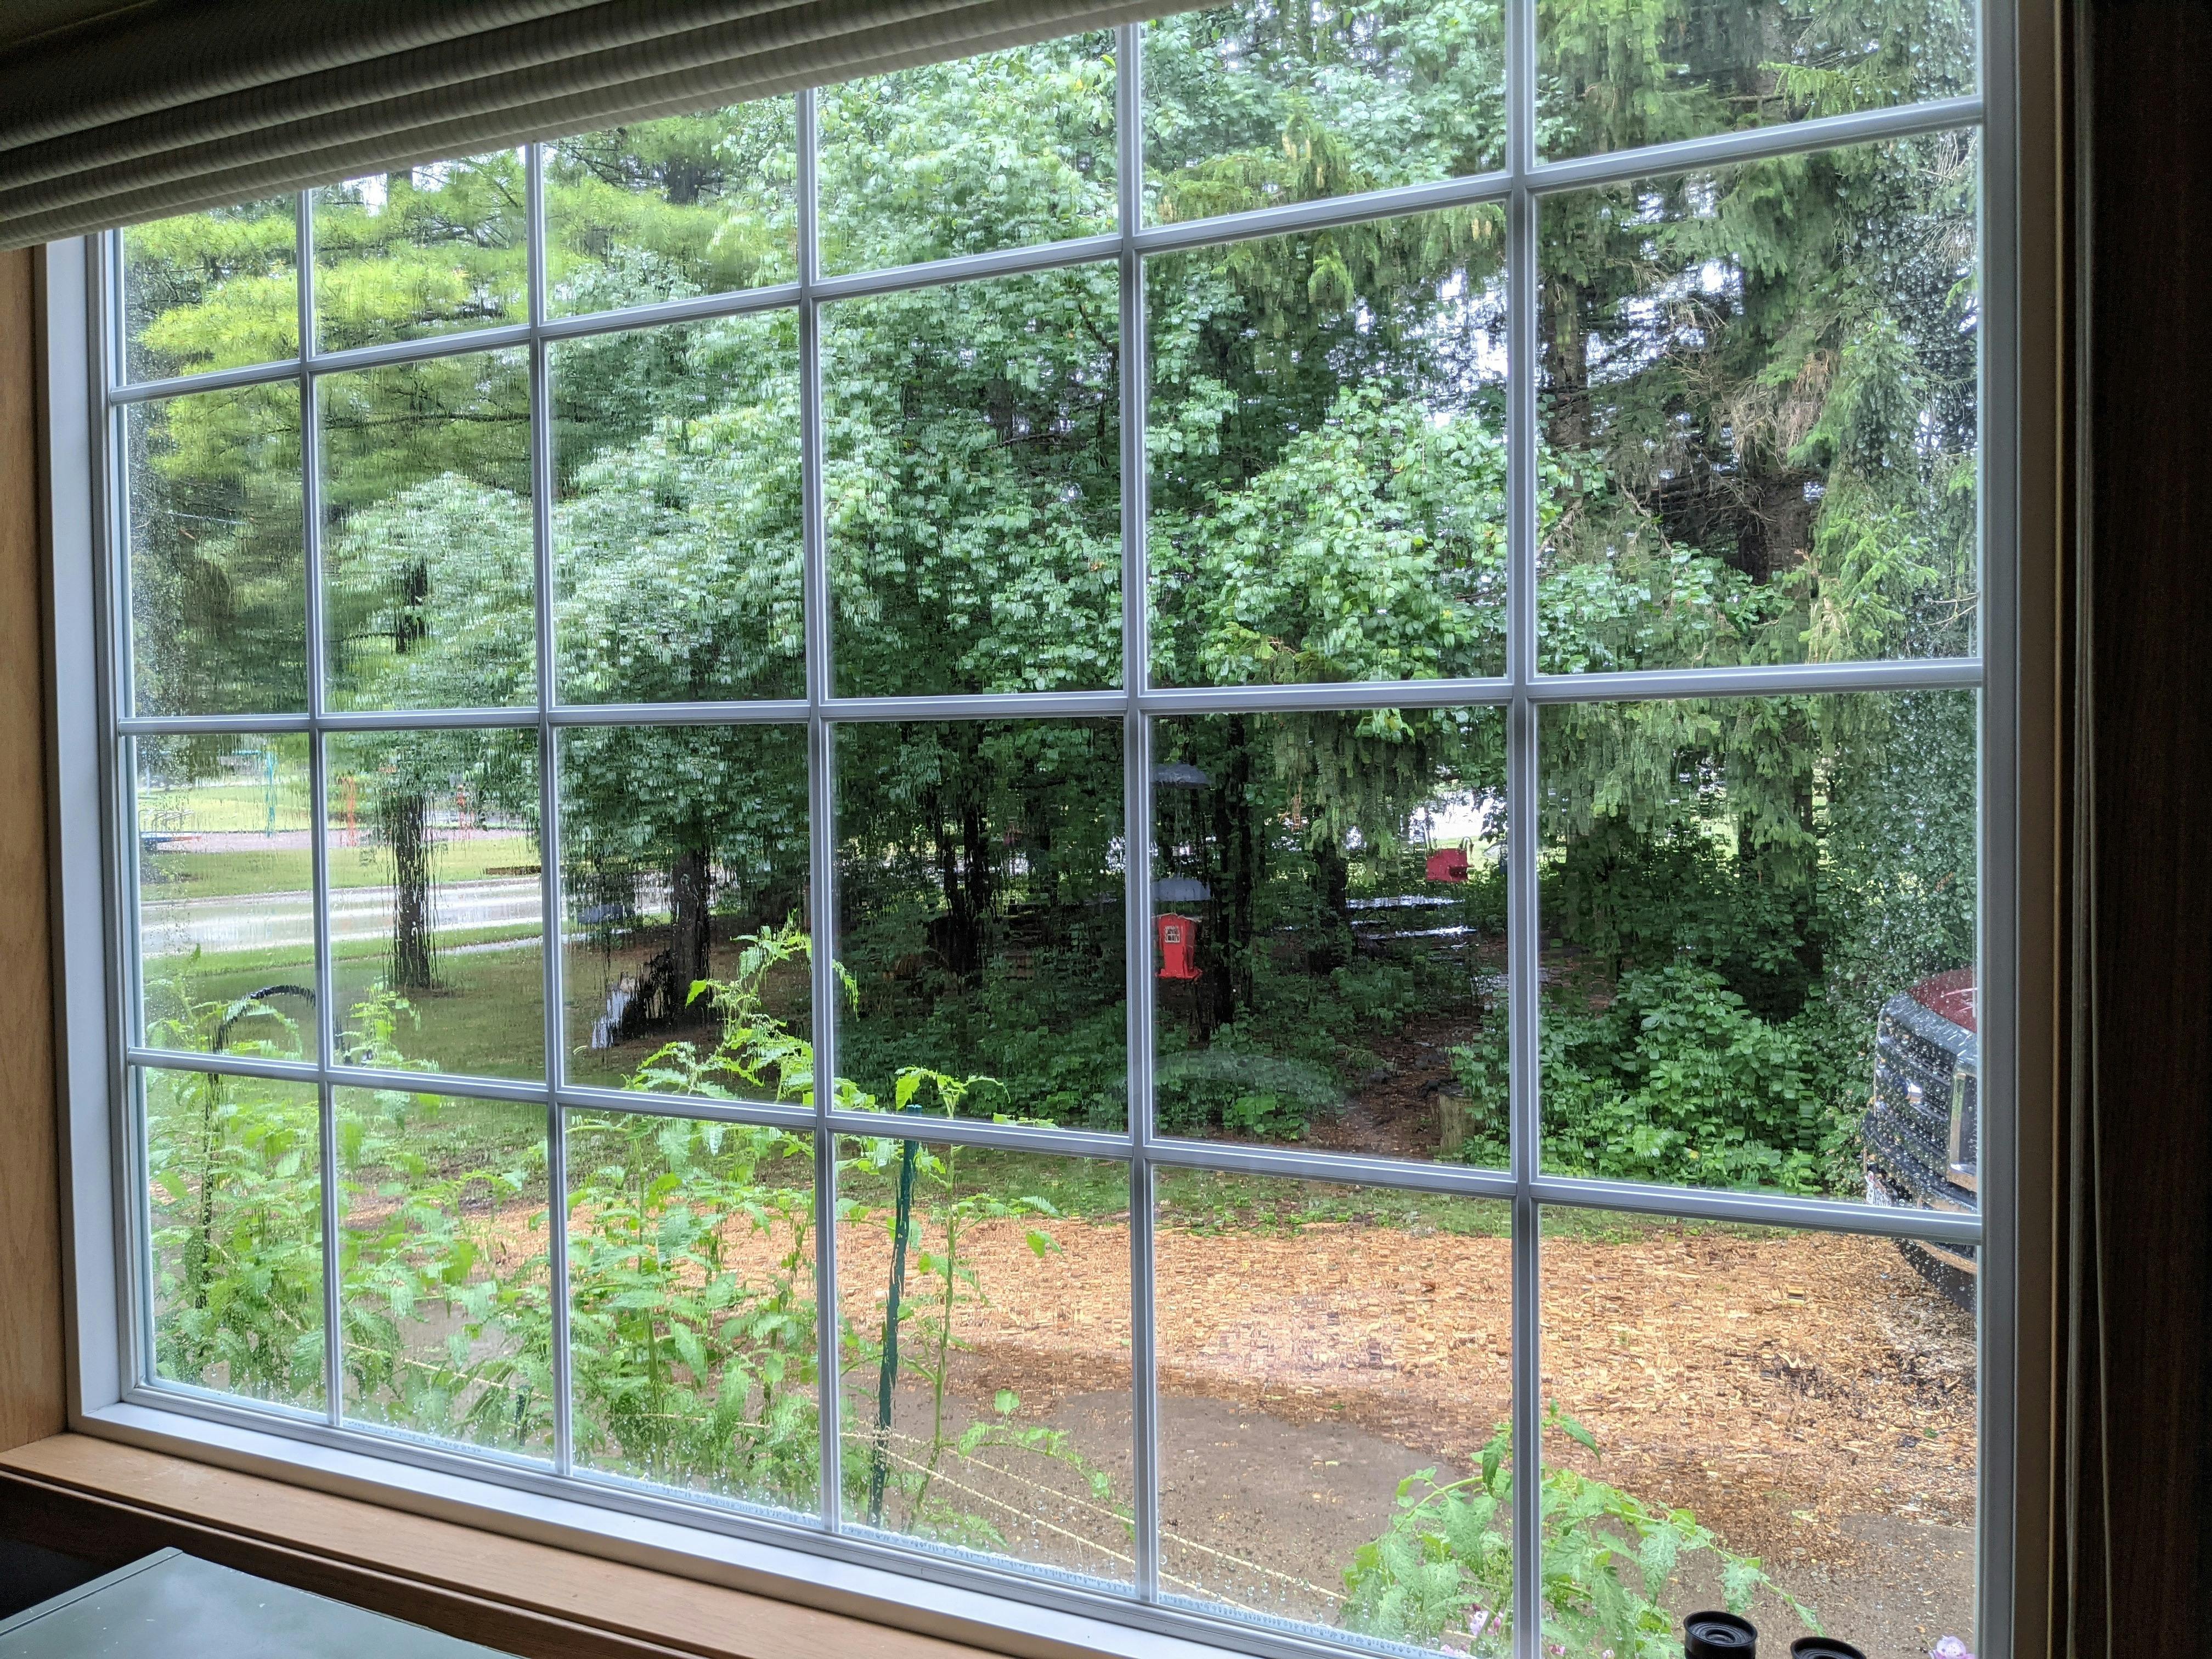 A view out an open window with many green trees outside.